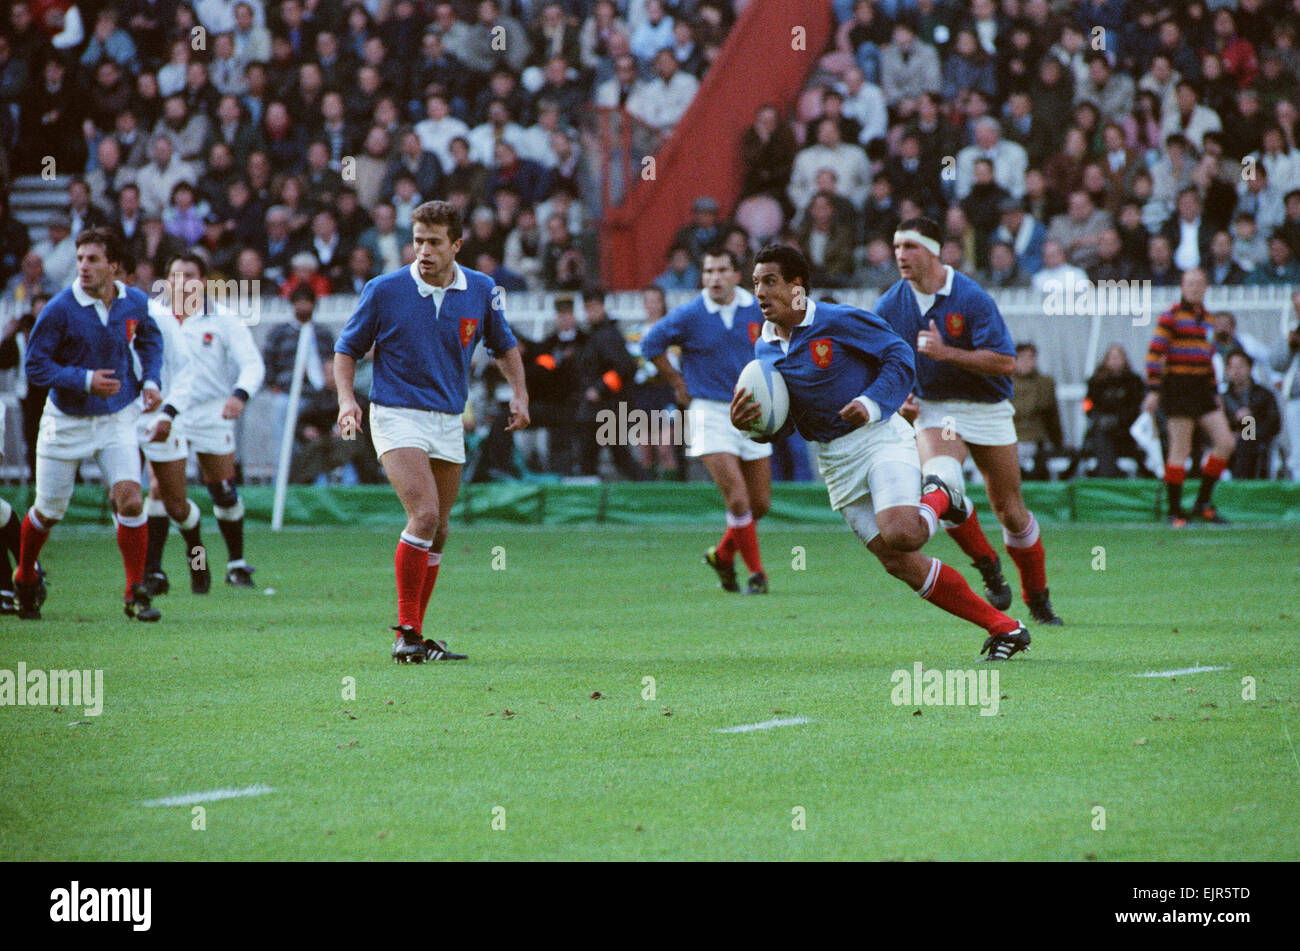 Rugby World Cup 1991. Parc des Princes, Paris France 10 v England 19.  19 October 1991 Serge Blanco with the ball in his last game for France. *** Local Caption *** WatScan - - 06/01/2010 Stock Photo